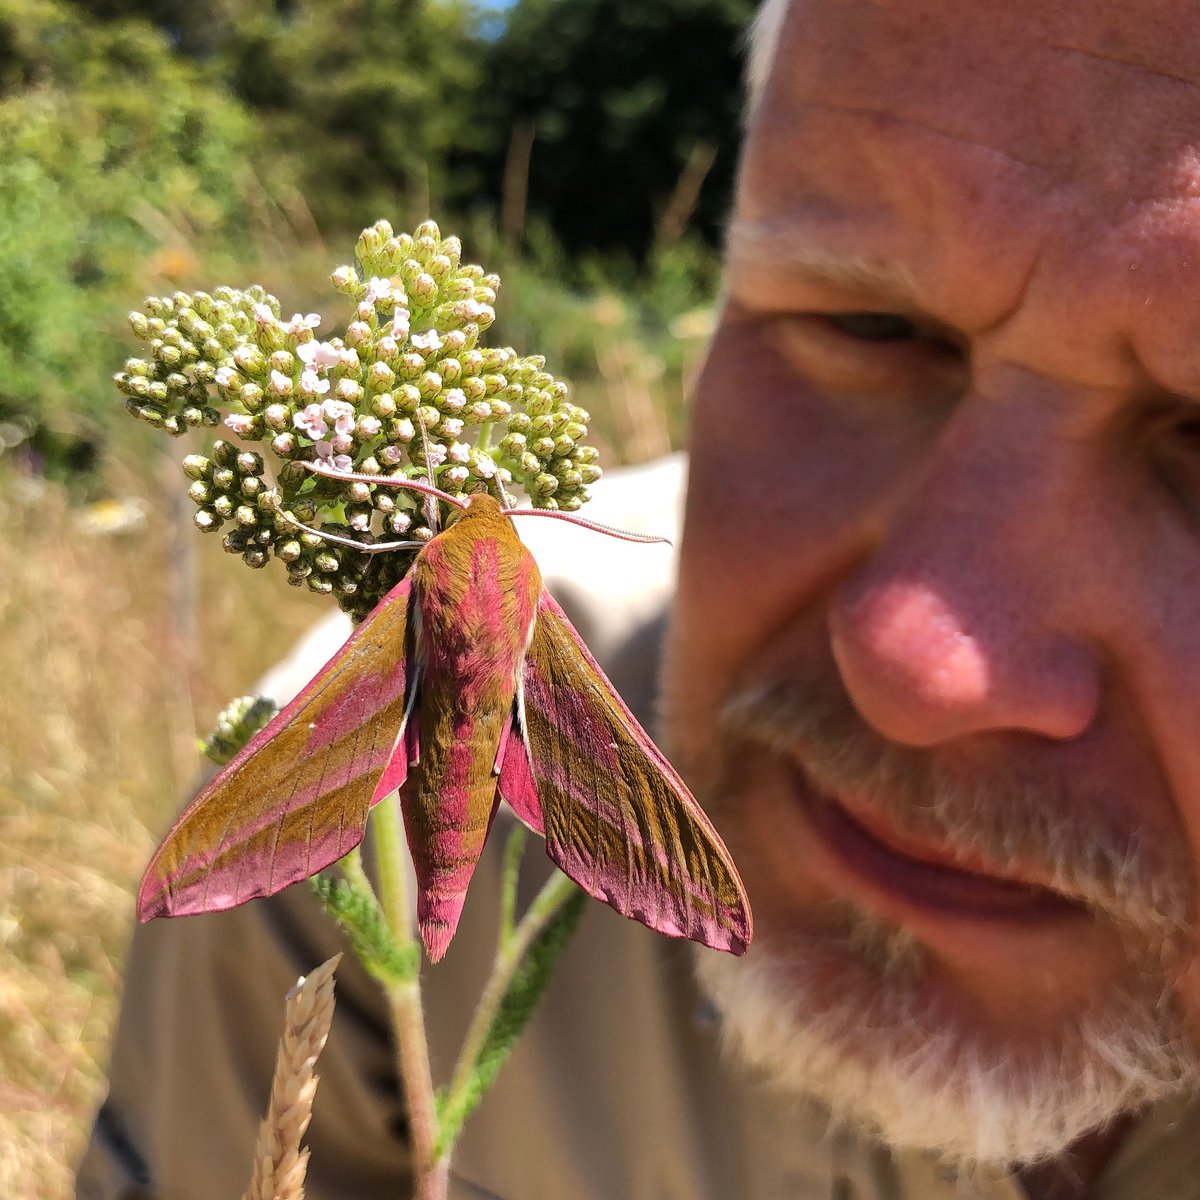 Spent the morning chasing pink elephants. #moths #suffolk #FroizeUncovered